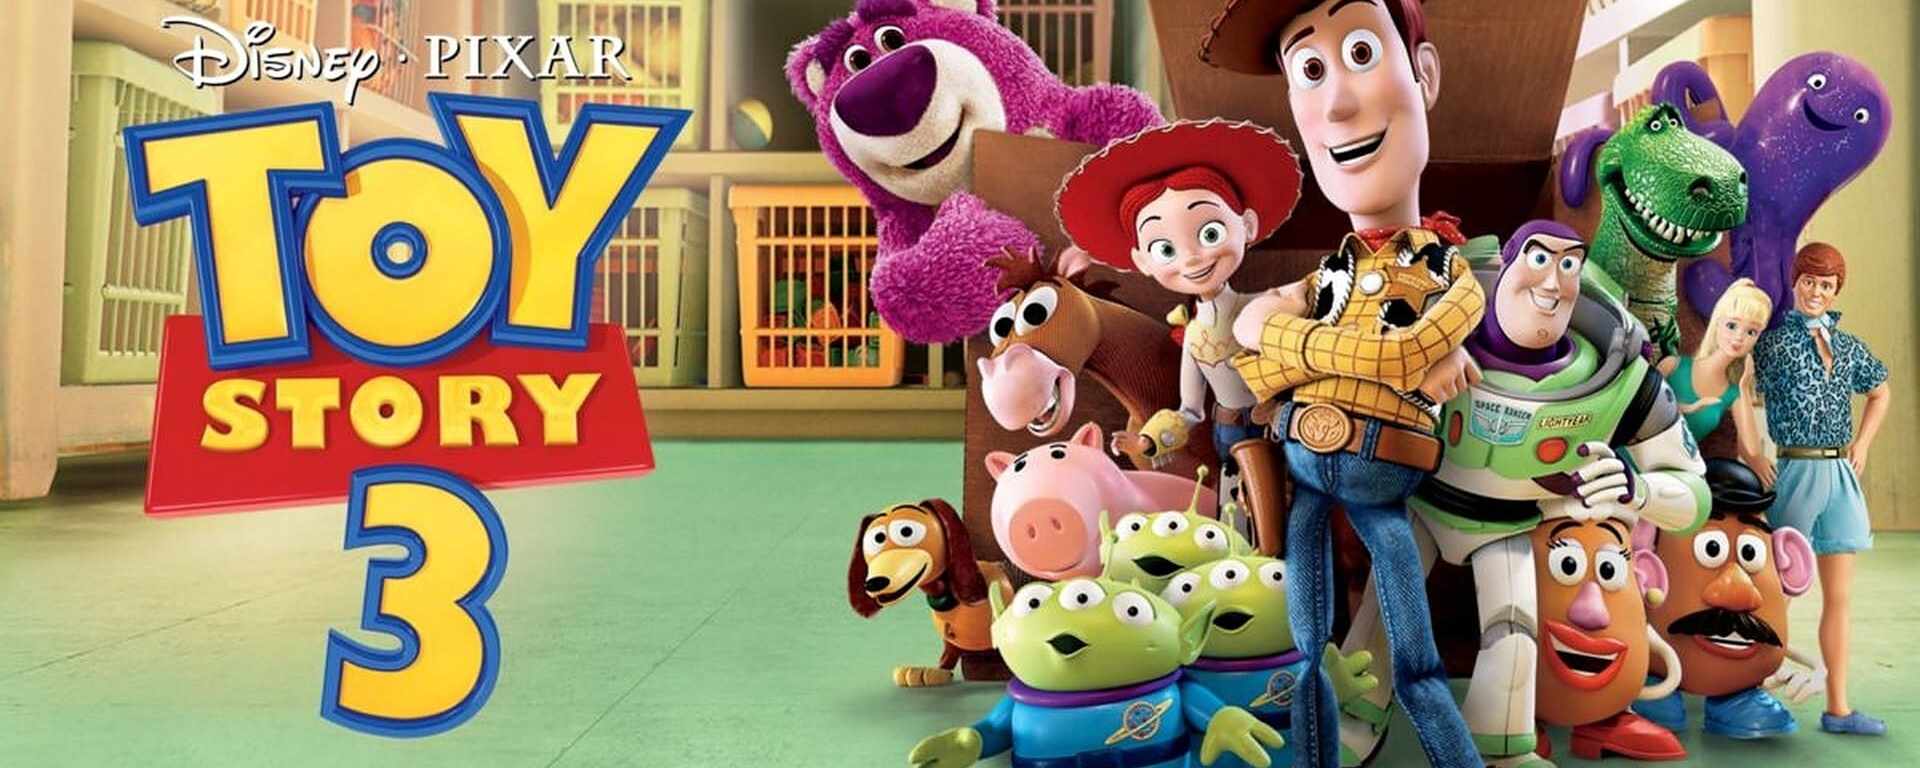 The Complete Toy Story Collection: Toy Story / Toy Story 2 / Toy Story 3  [Region2], will NOT play on regular US player